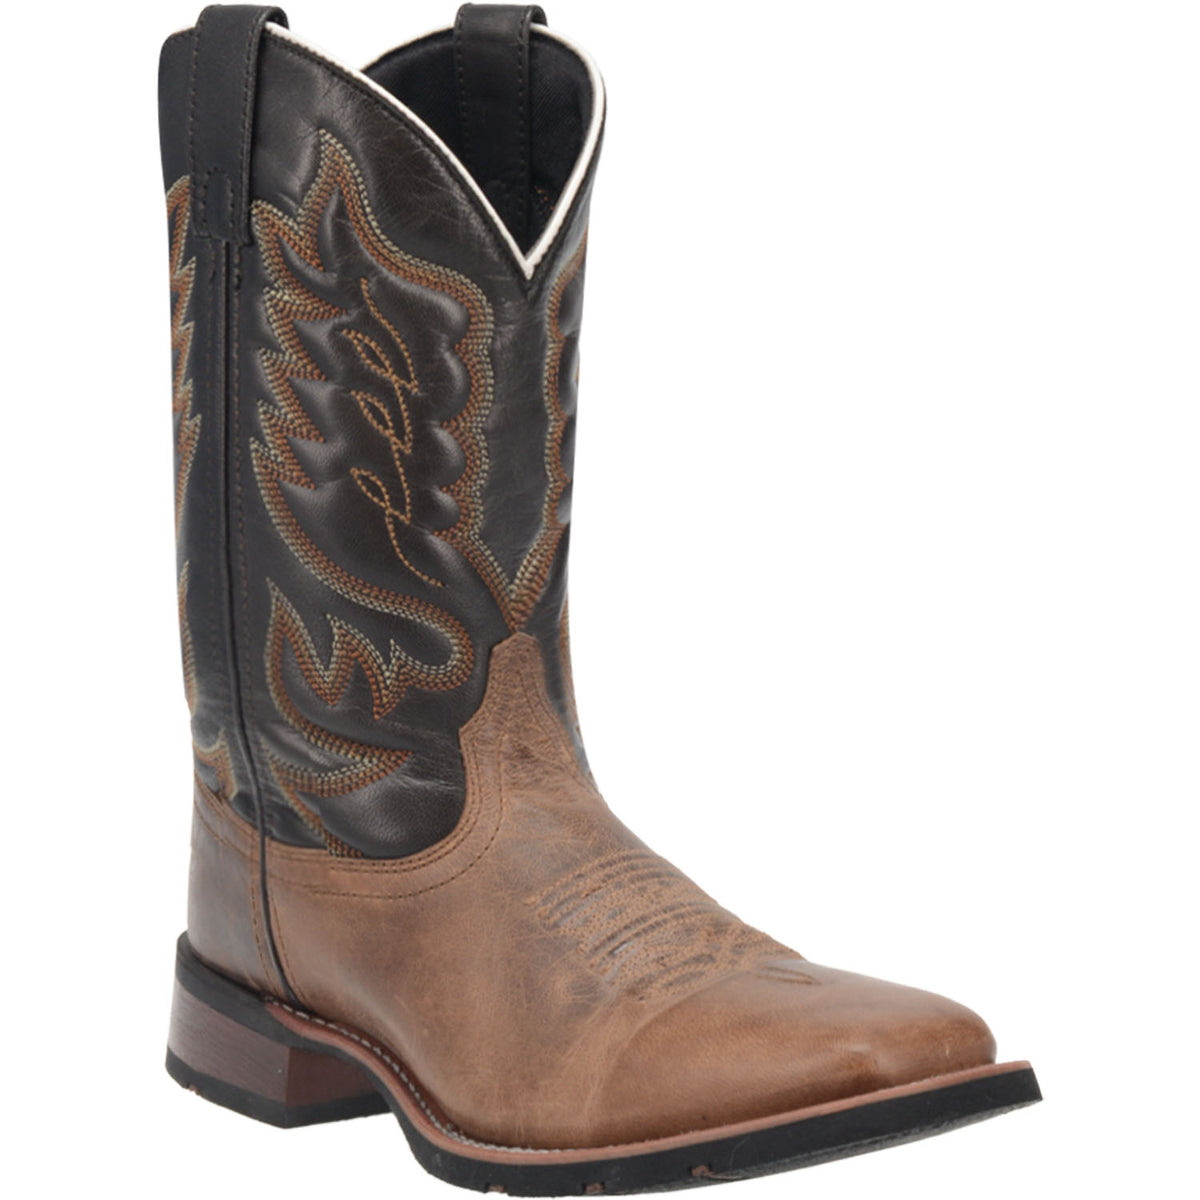 MONTANA LEATHER BOOT Cover